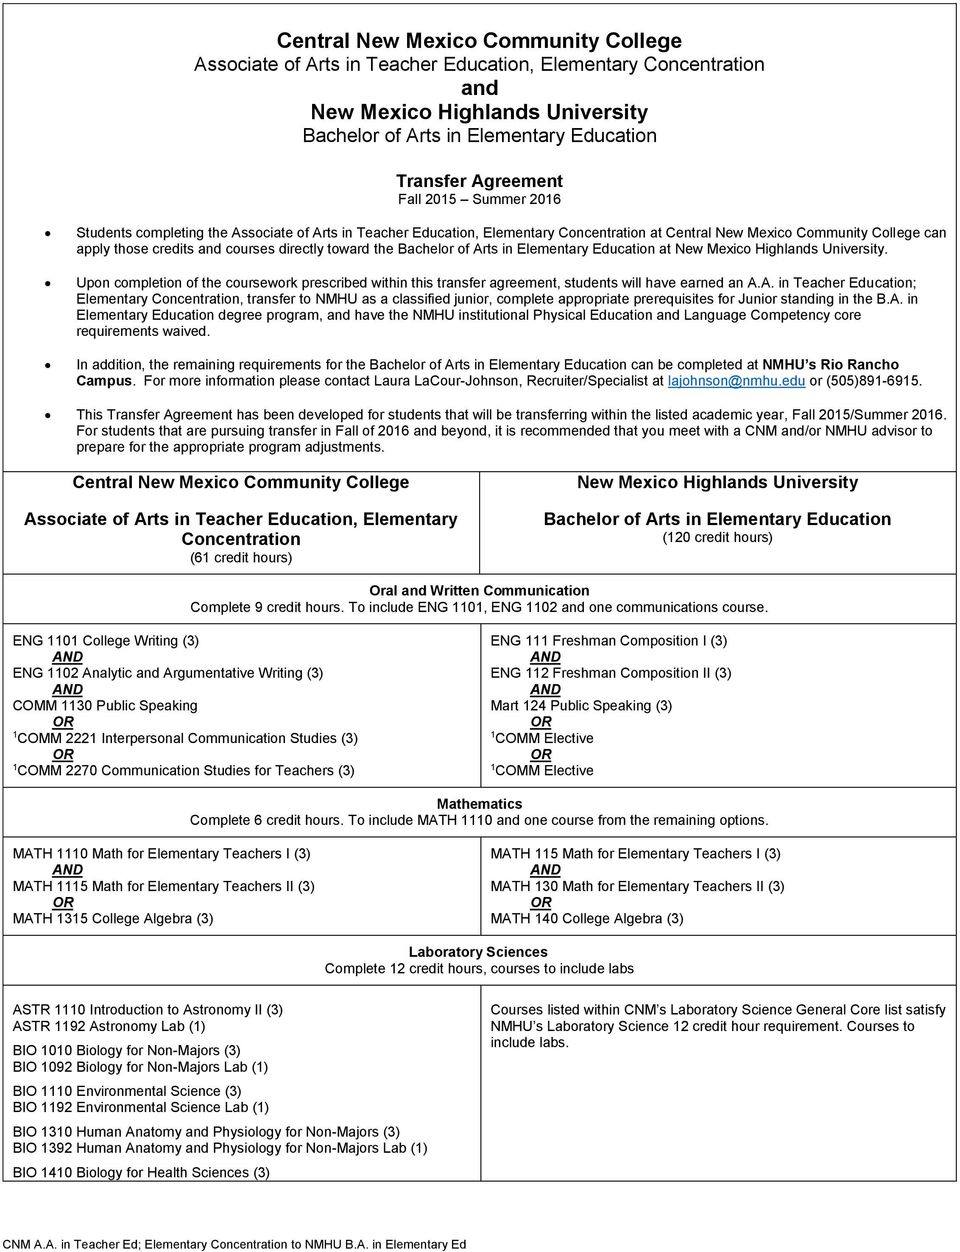 toward the Bachelor of Arts in Elementary Education at New Mexico Highlands University. Upon completion of the coursework prescribed within this transfer agreement, students will have earned an A.A. in Teacher Education; Elementary Concentration, transfer to NMHU as a classified junior, complete appropriate prerequisites for Junior standing in the B.